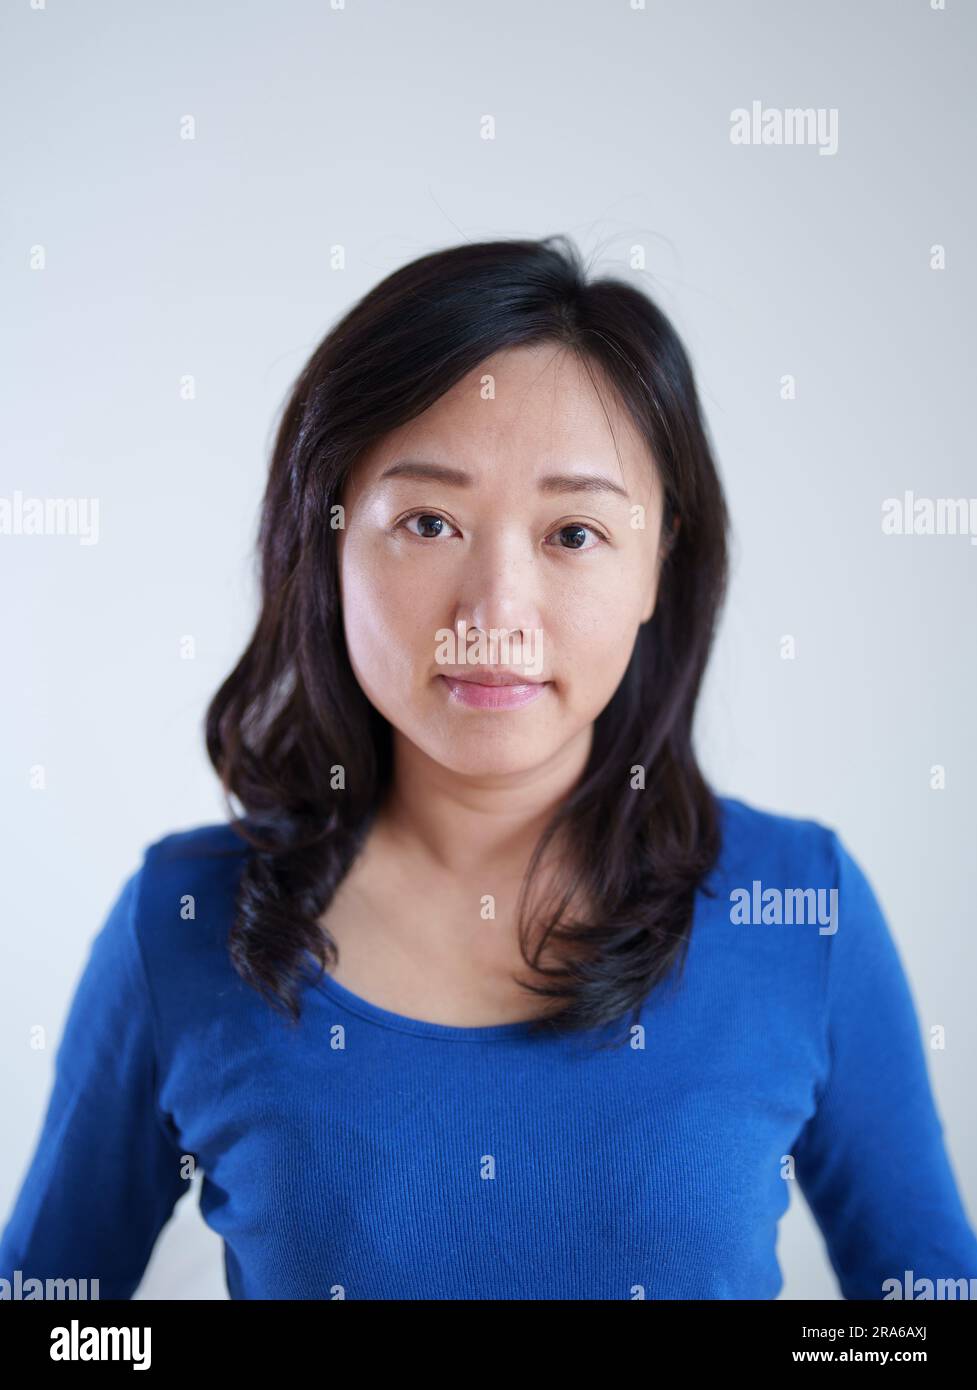 Portrait of an Asian woman wearing a blue top Stock Photo